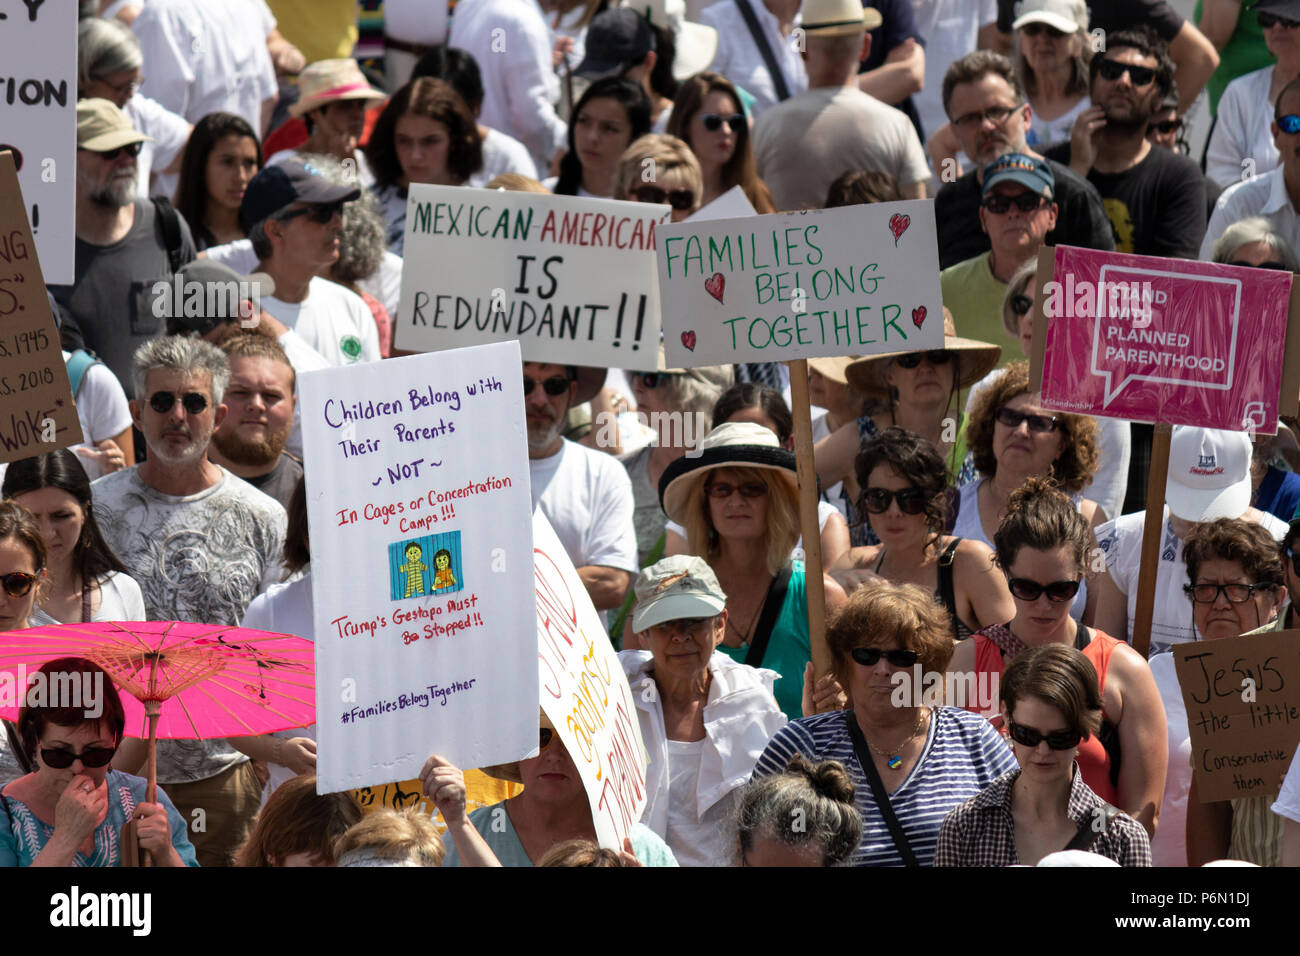 A crowd of protesters hold signs at the Families Belong Together rally in Asheville, NC, USA Stock Photo